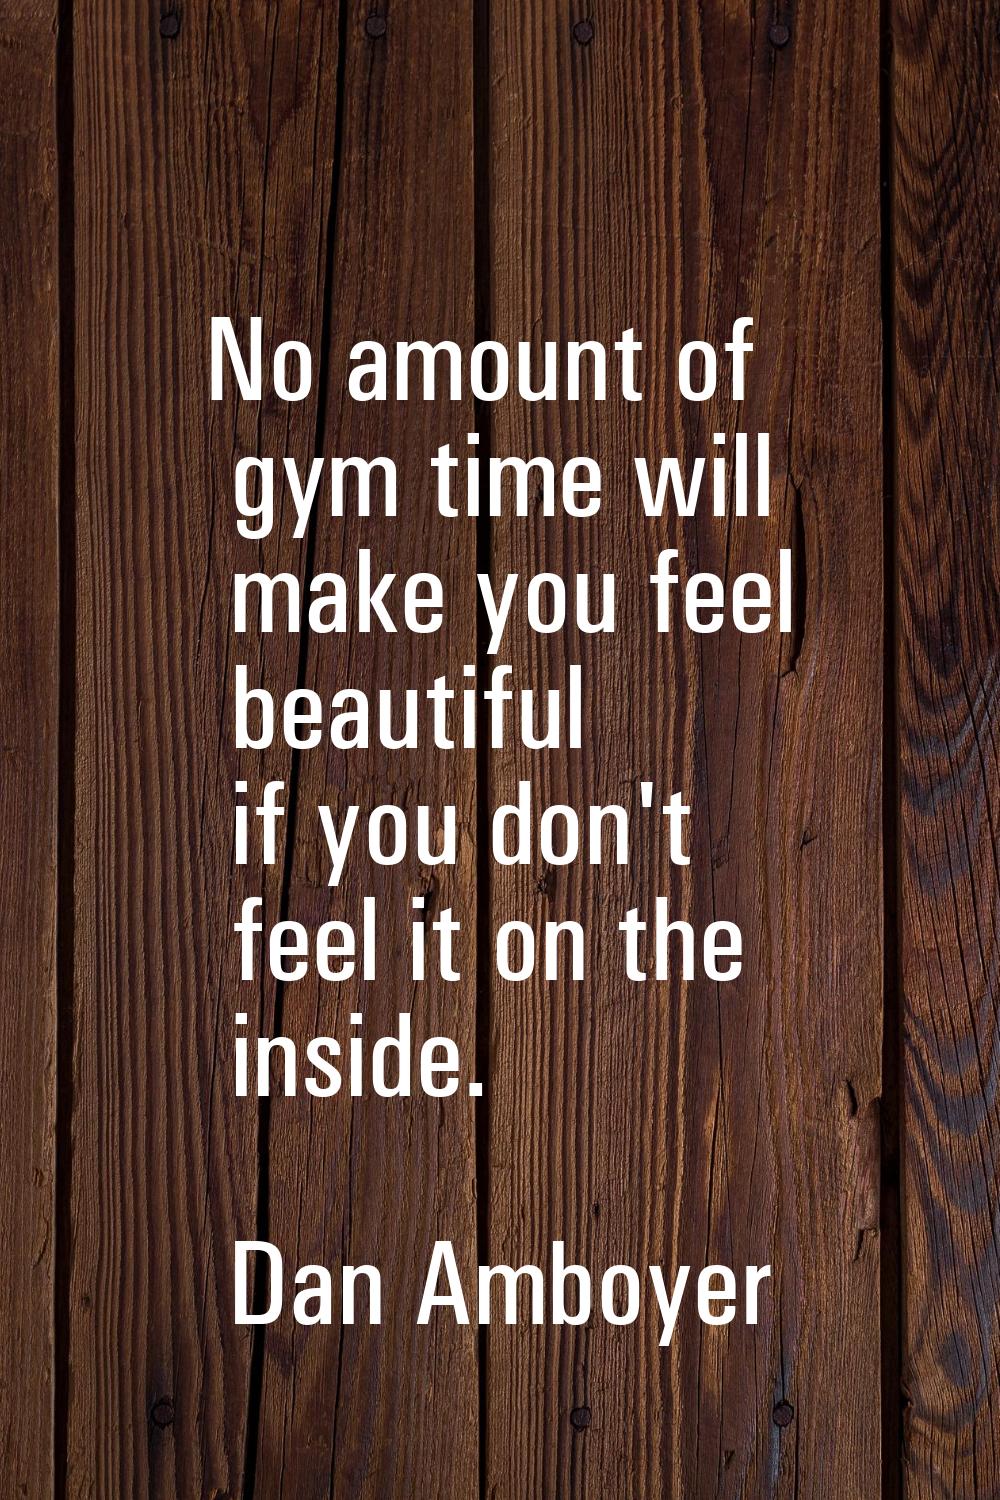 No amount of gym time will make you feel beautiful if you don't feel it on the inside.